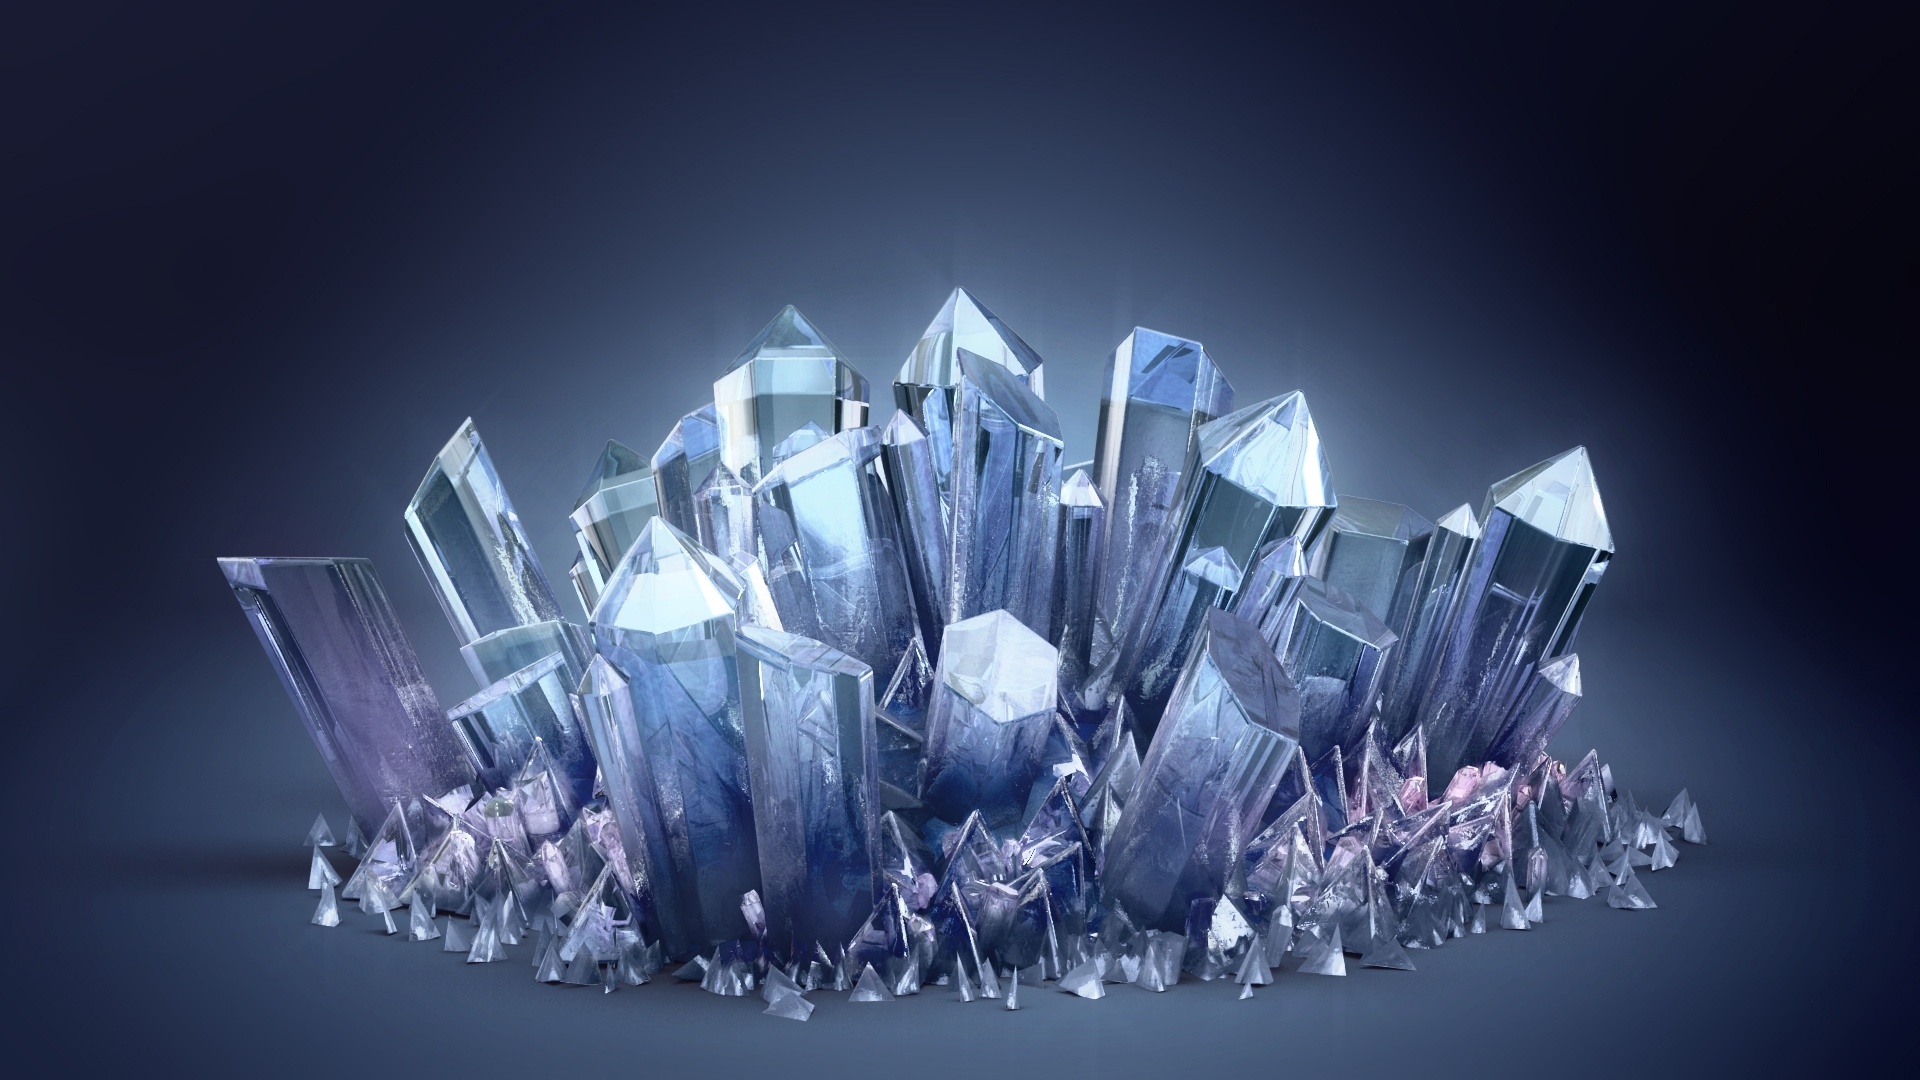 Crystals wallpaper for pc